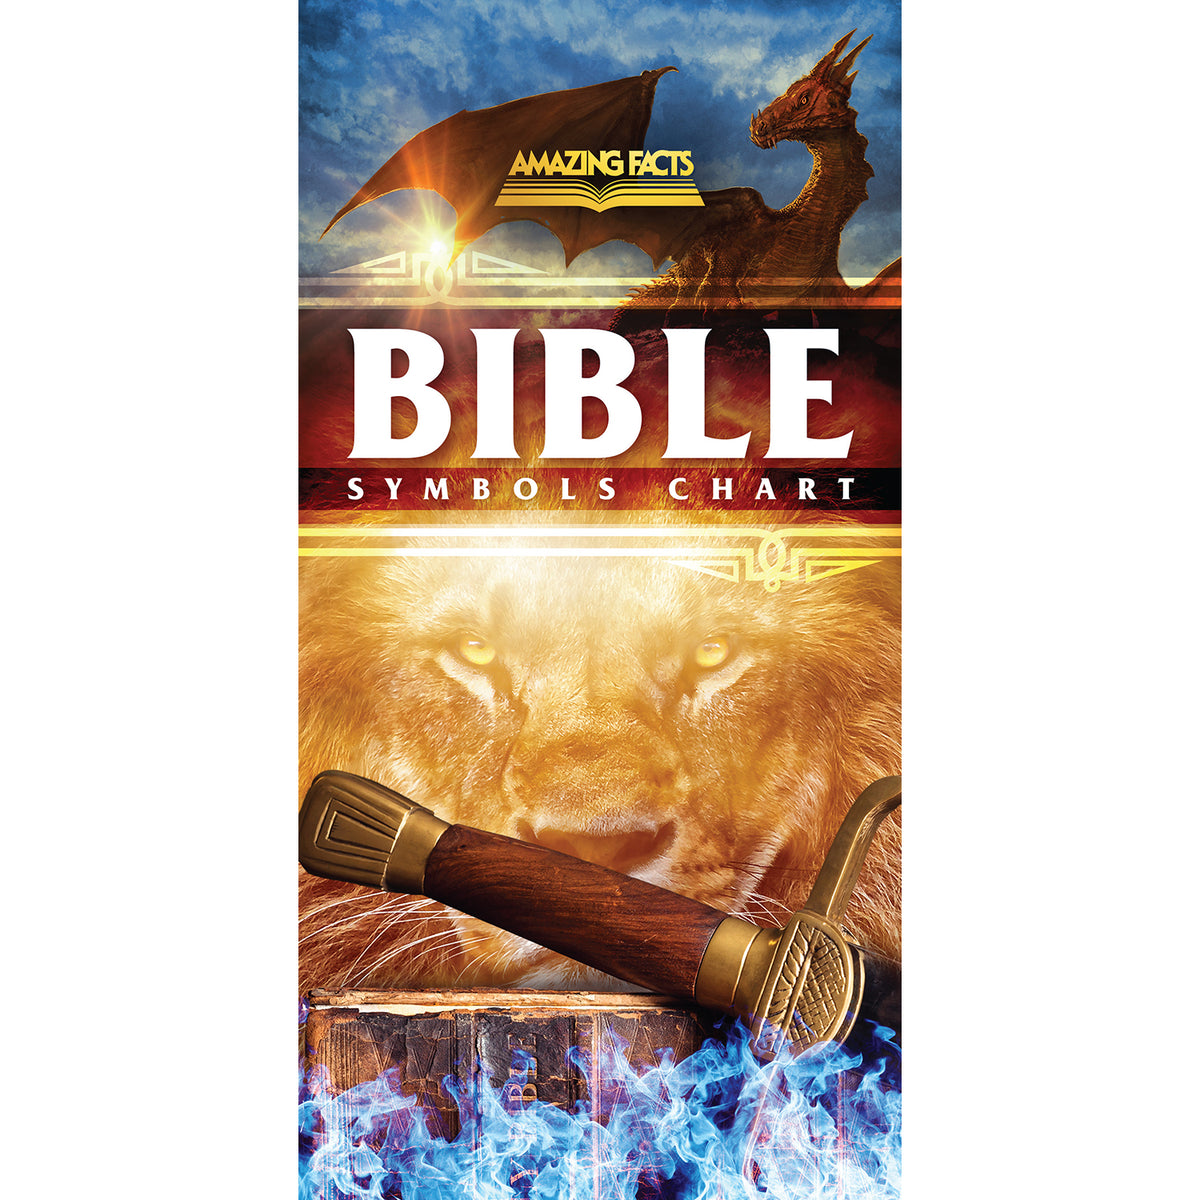 Bible Symbols Chart Foldout: Symbols and Numbers of the Bible by Amazing Facts